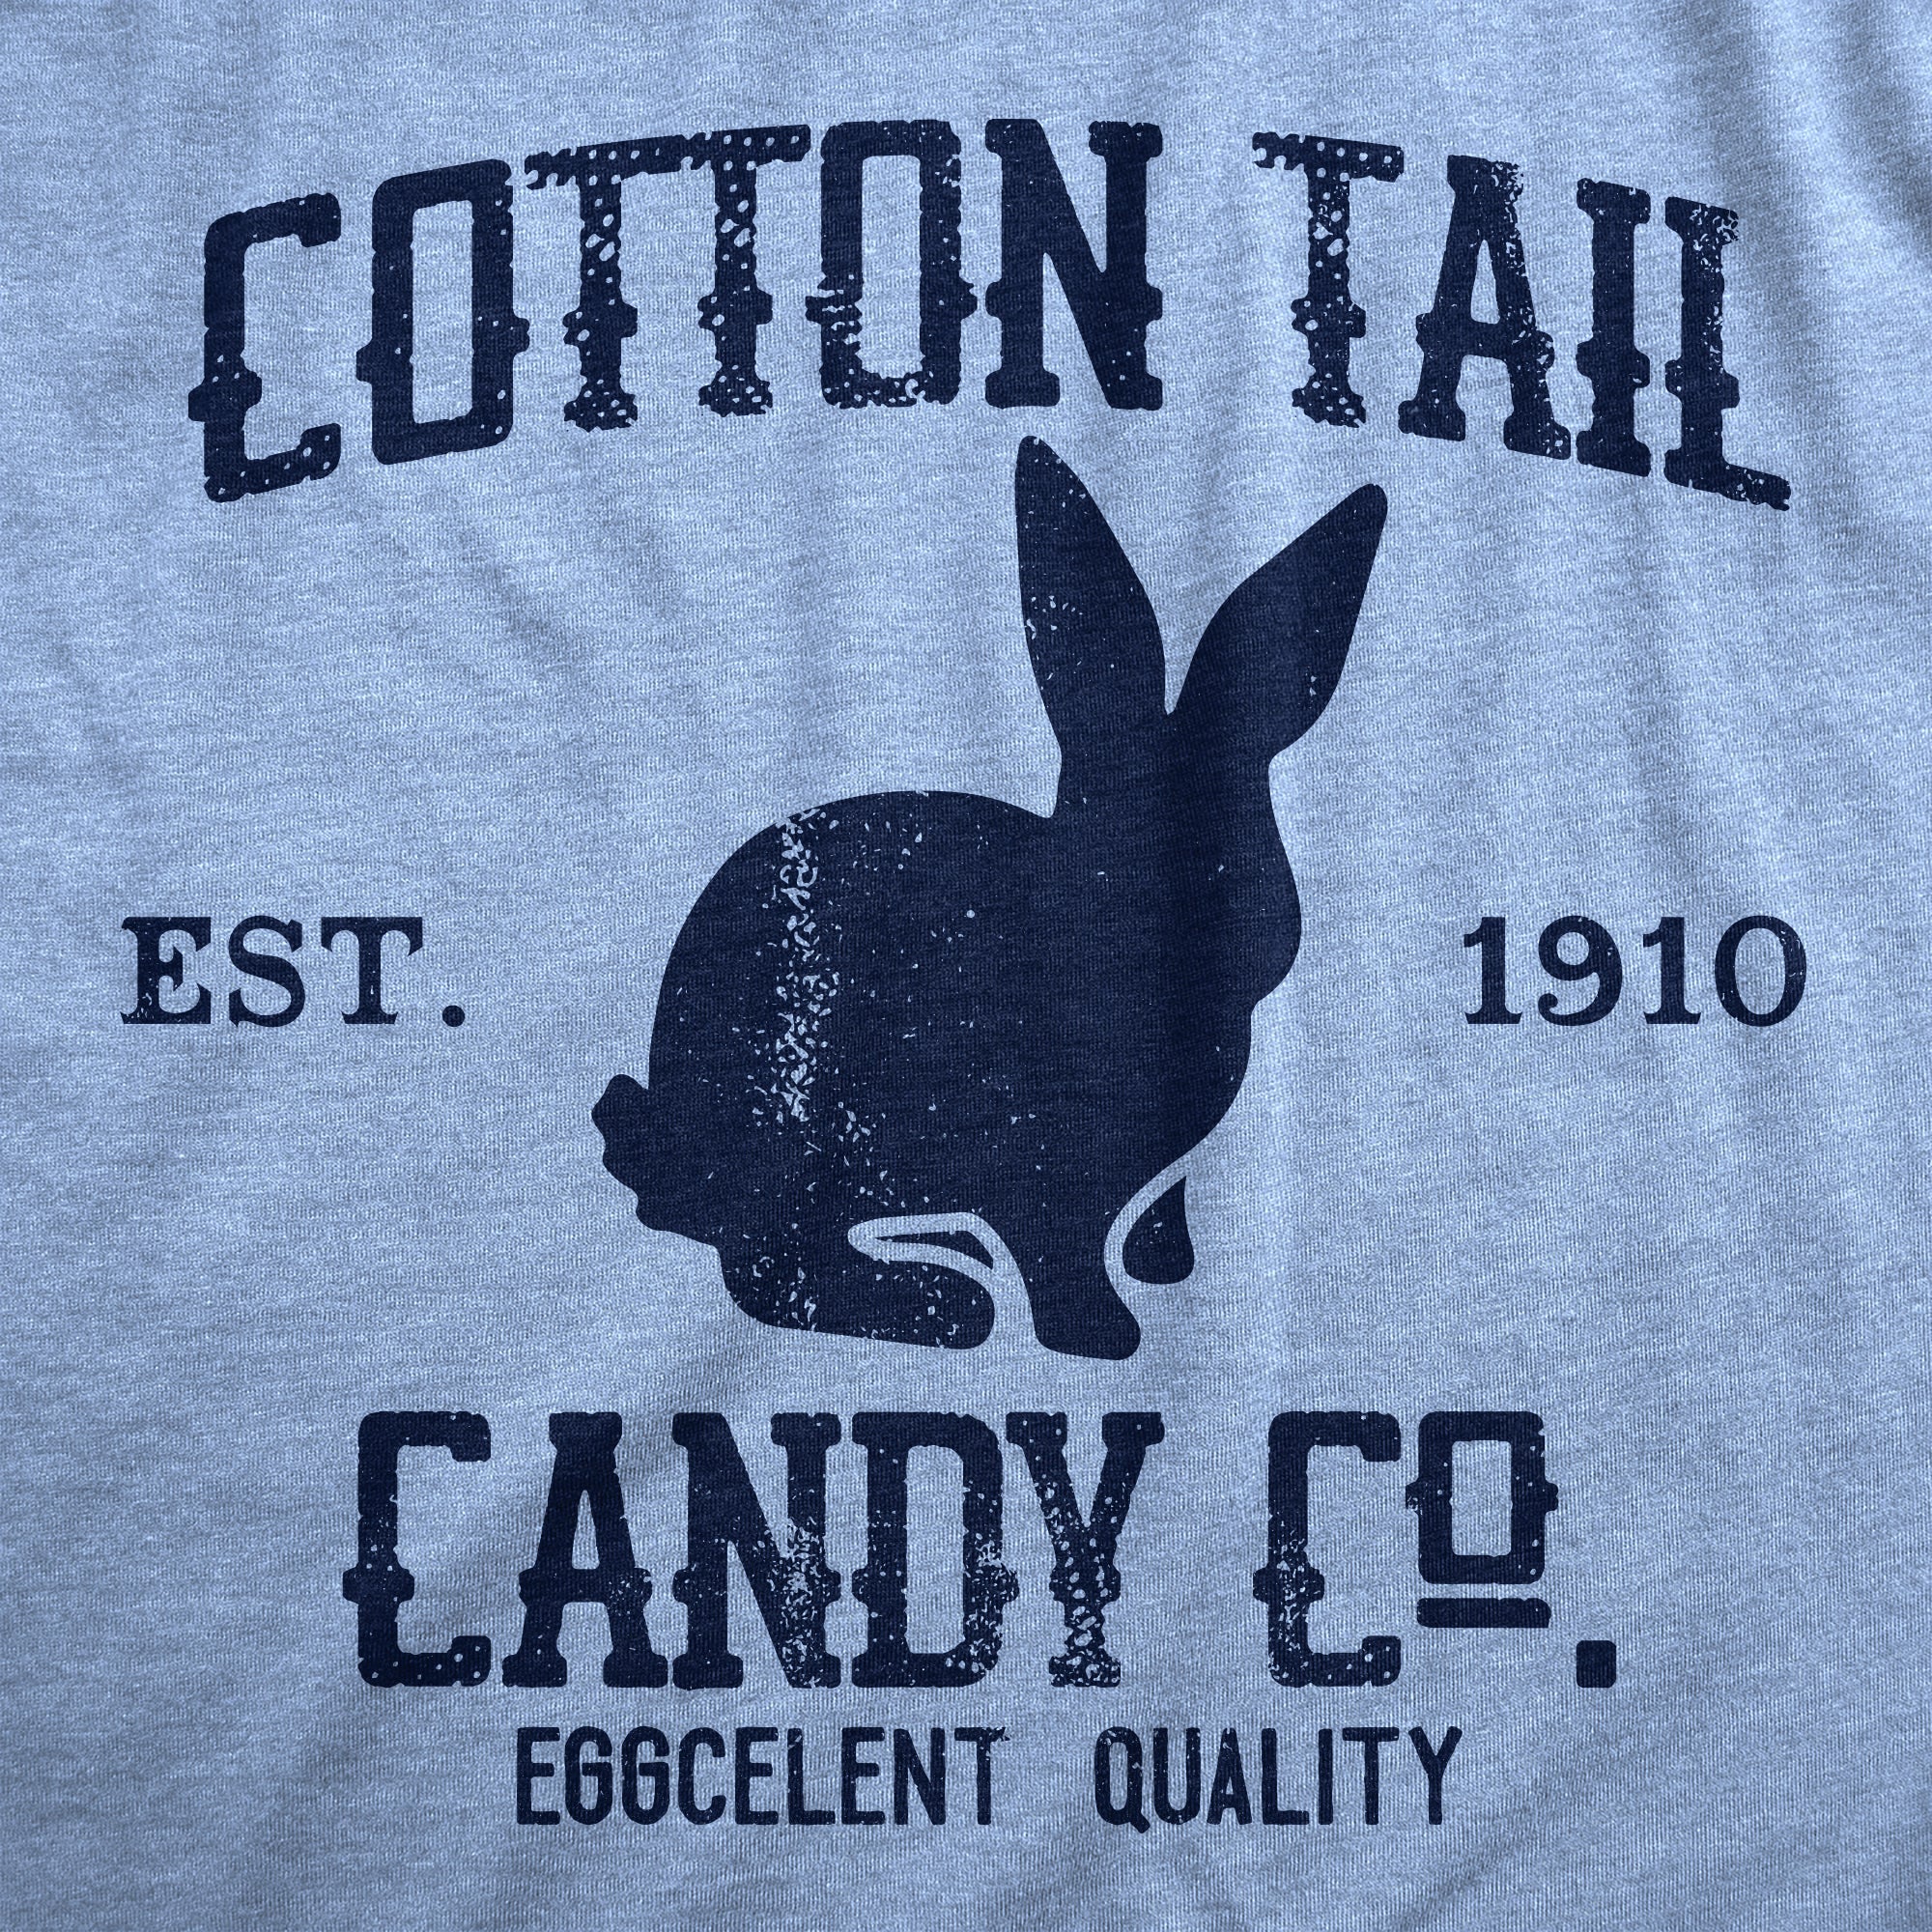 Funny Light Heather Blue - COTTON Cotton Tail Candy Co Mens T Shirt Nerdy Easter Food Tee